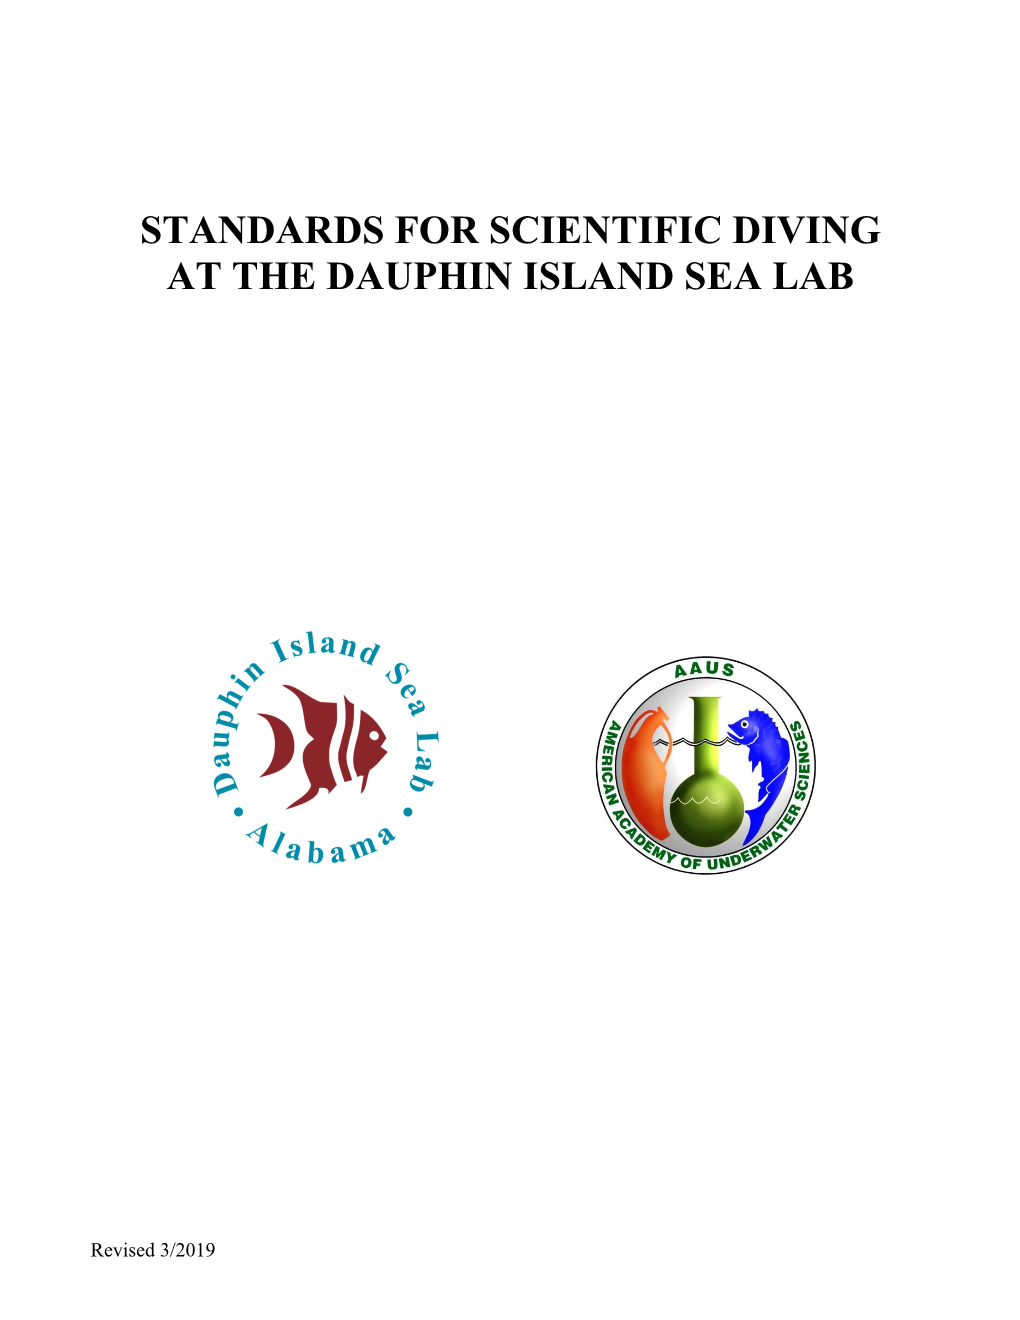 Standards for Scientific Diving at the Dauphin Island Sea Lab